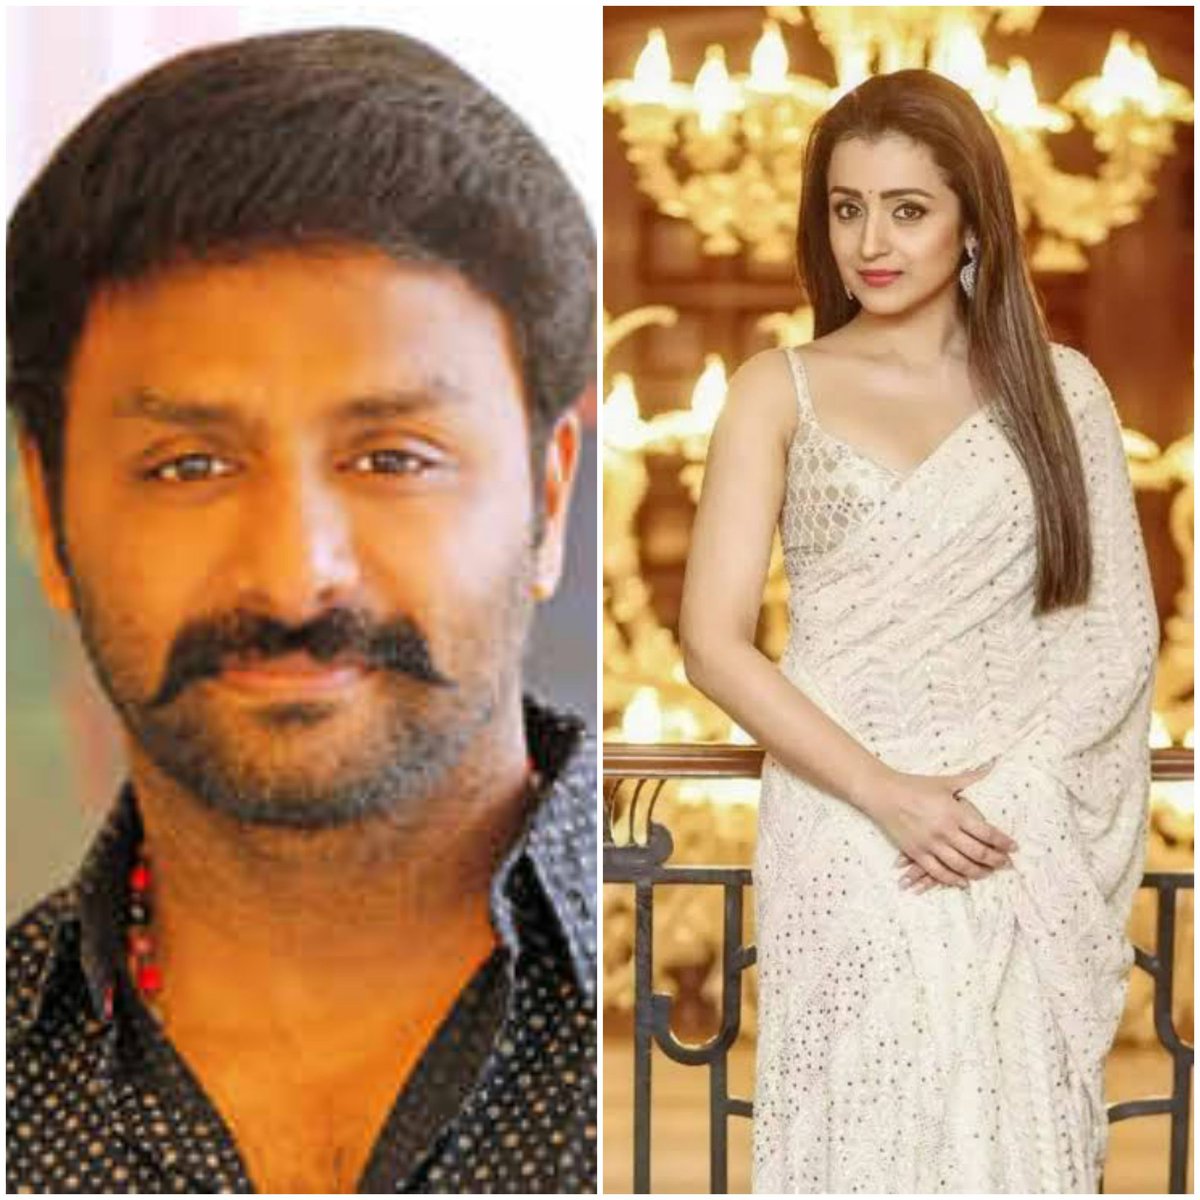 #TrishaKrishnan teams up with director @gauravnarayanan known for his films #ThoongaNagaram and #SigaramThodu for her 68th film tentatively titled #KolaiVazhakku
This collaboration promises to be a treat for us ! 🎥✨ #Trisha68